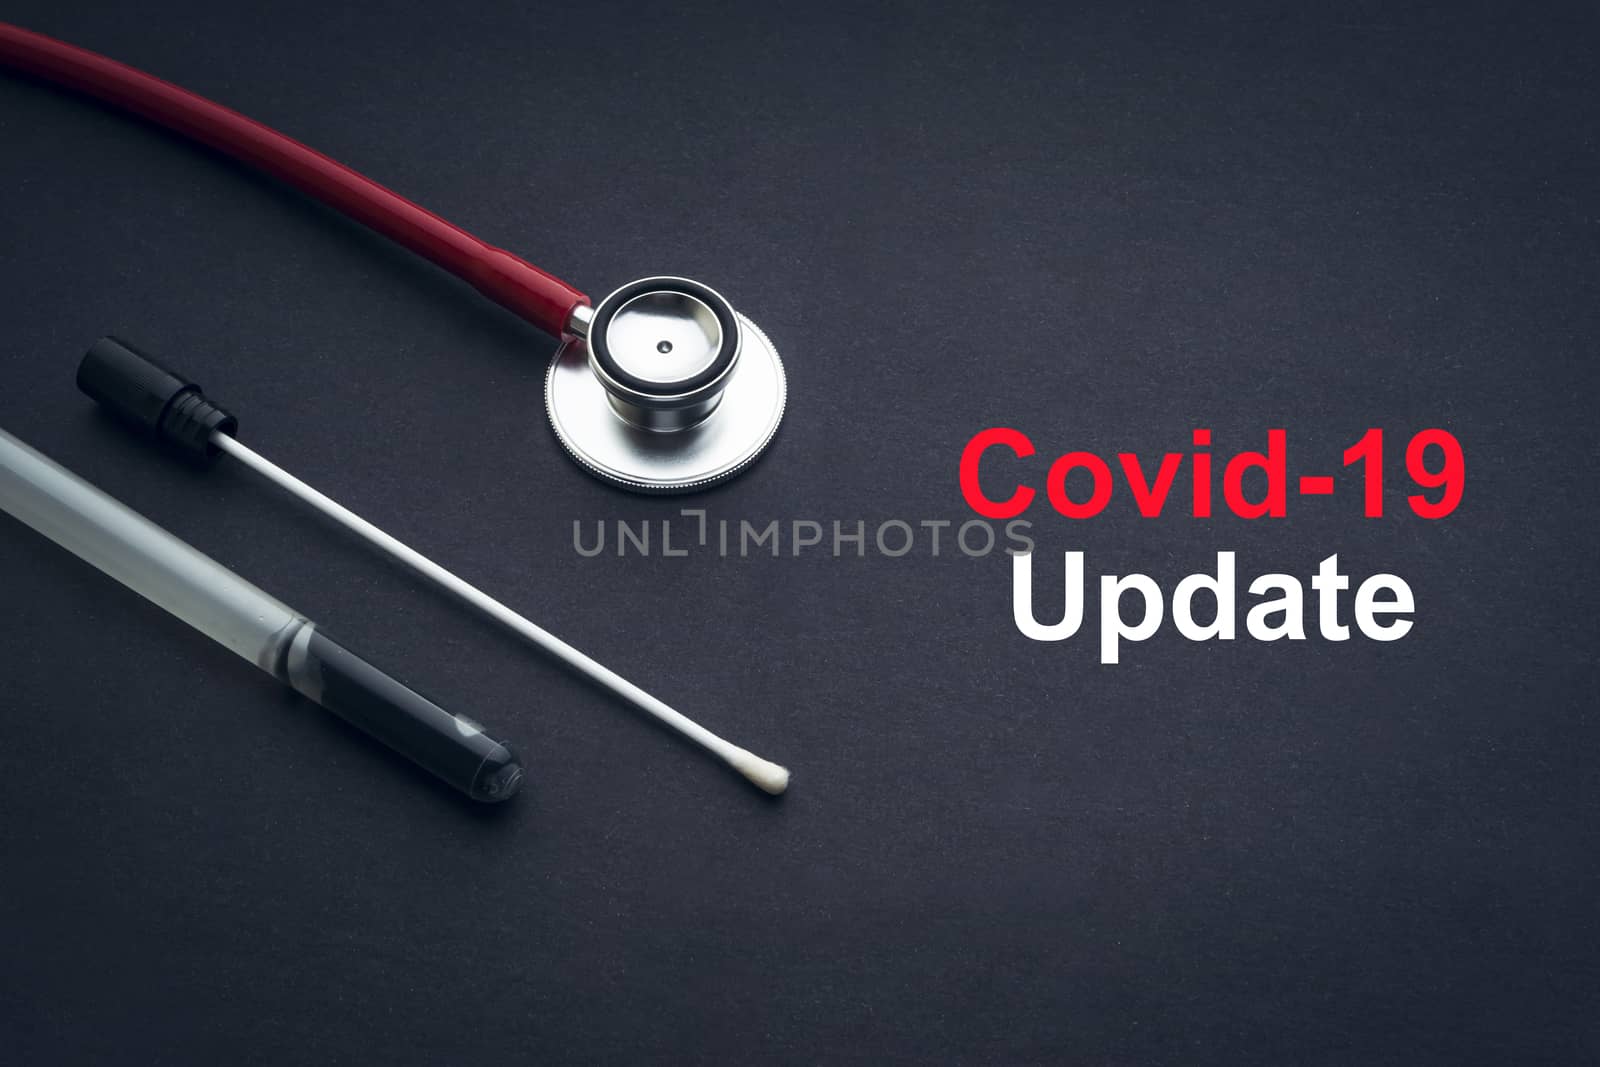 COVID-19 or CORONAVIRUS UPDATE text with stethoscope and medical swab on black background by silverwings